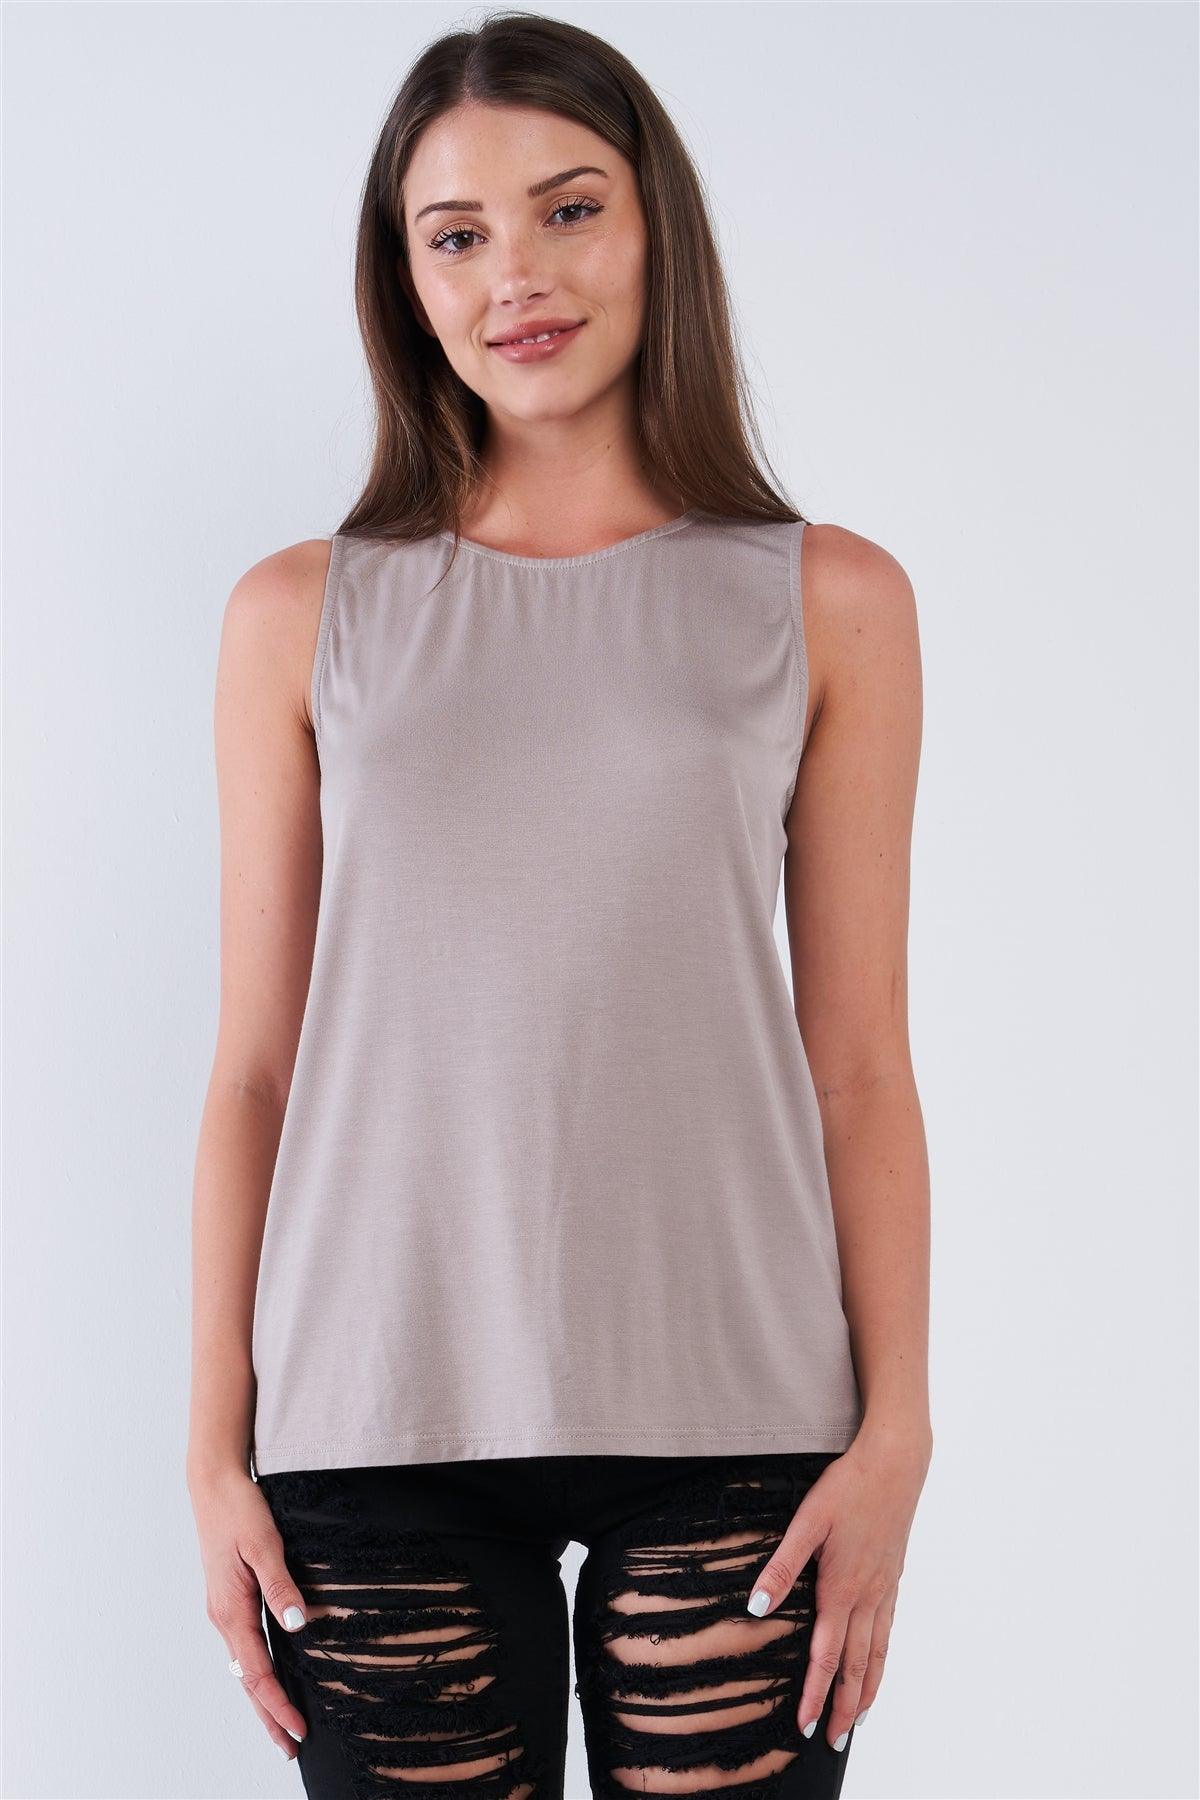 Taupe Grey Cut Out Back Relaxed Fit Crew-Neck Sleeveless Casual Tunic Top /1-2-2-1